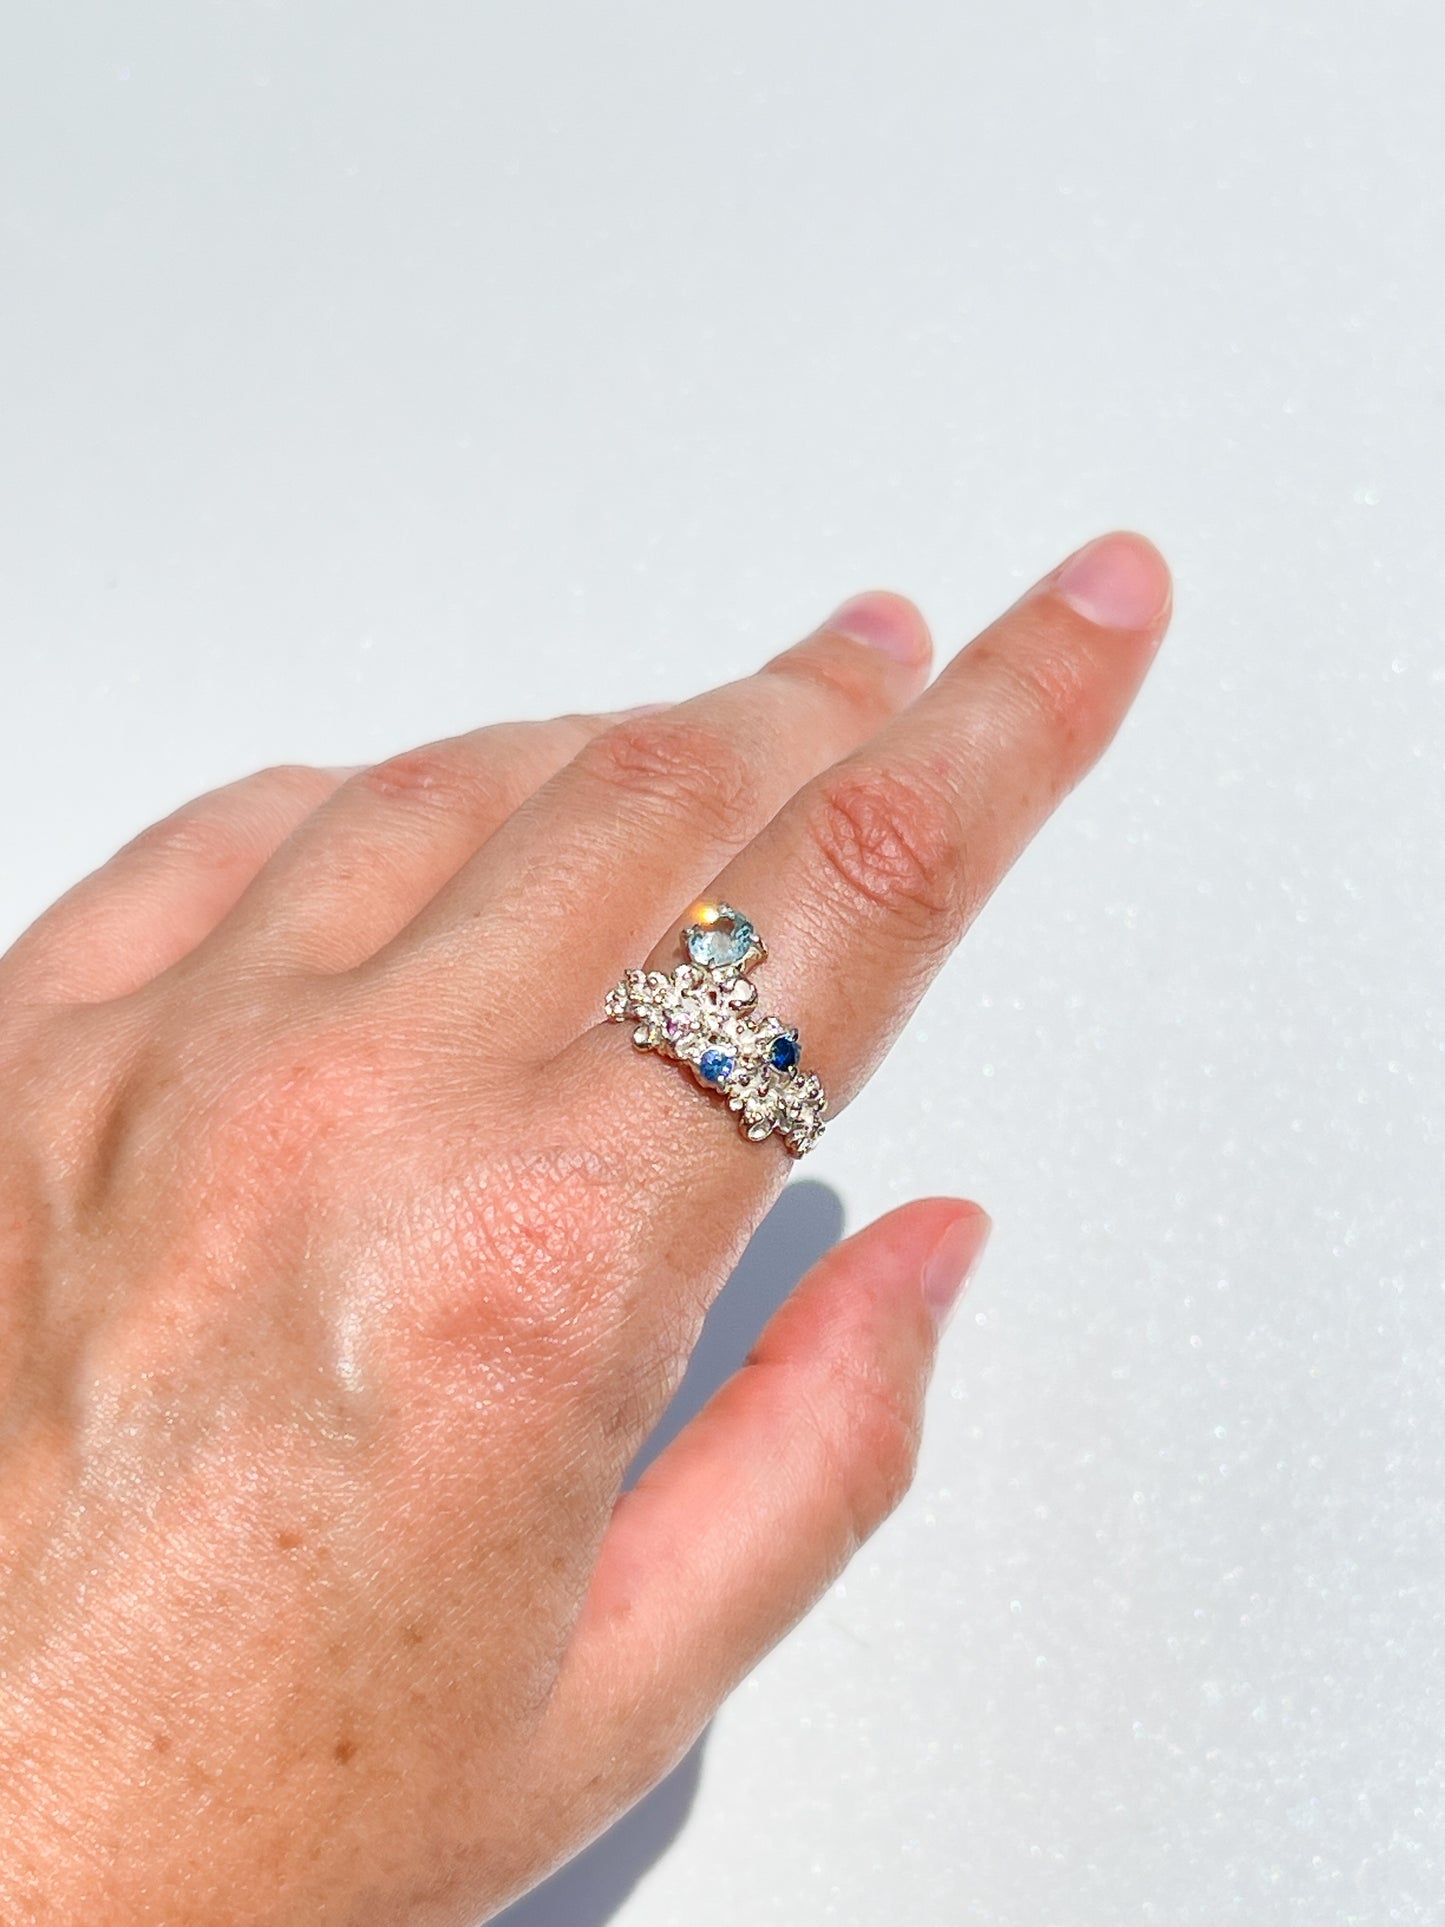 Coral Ring Silver with Blue & Pink Sapphires, and a large Aquamarine Gem stones- size 7.5